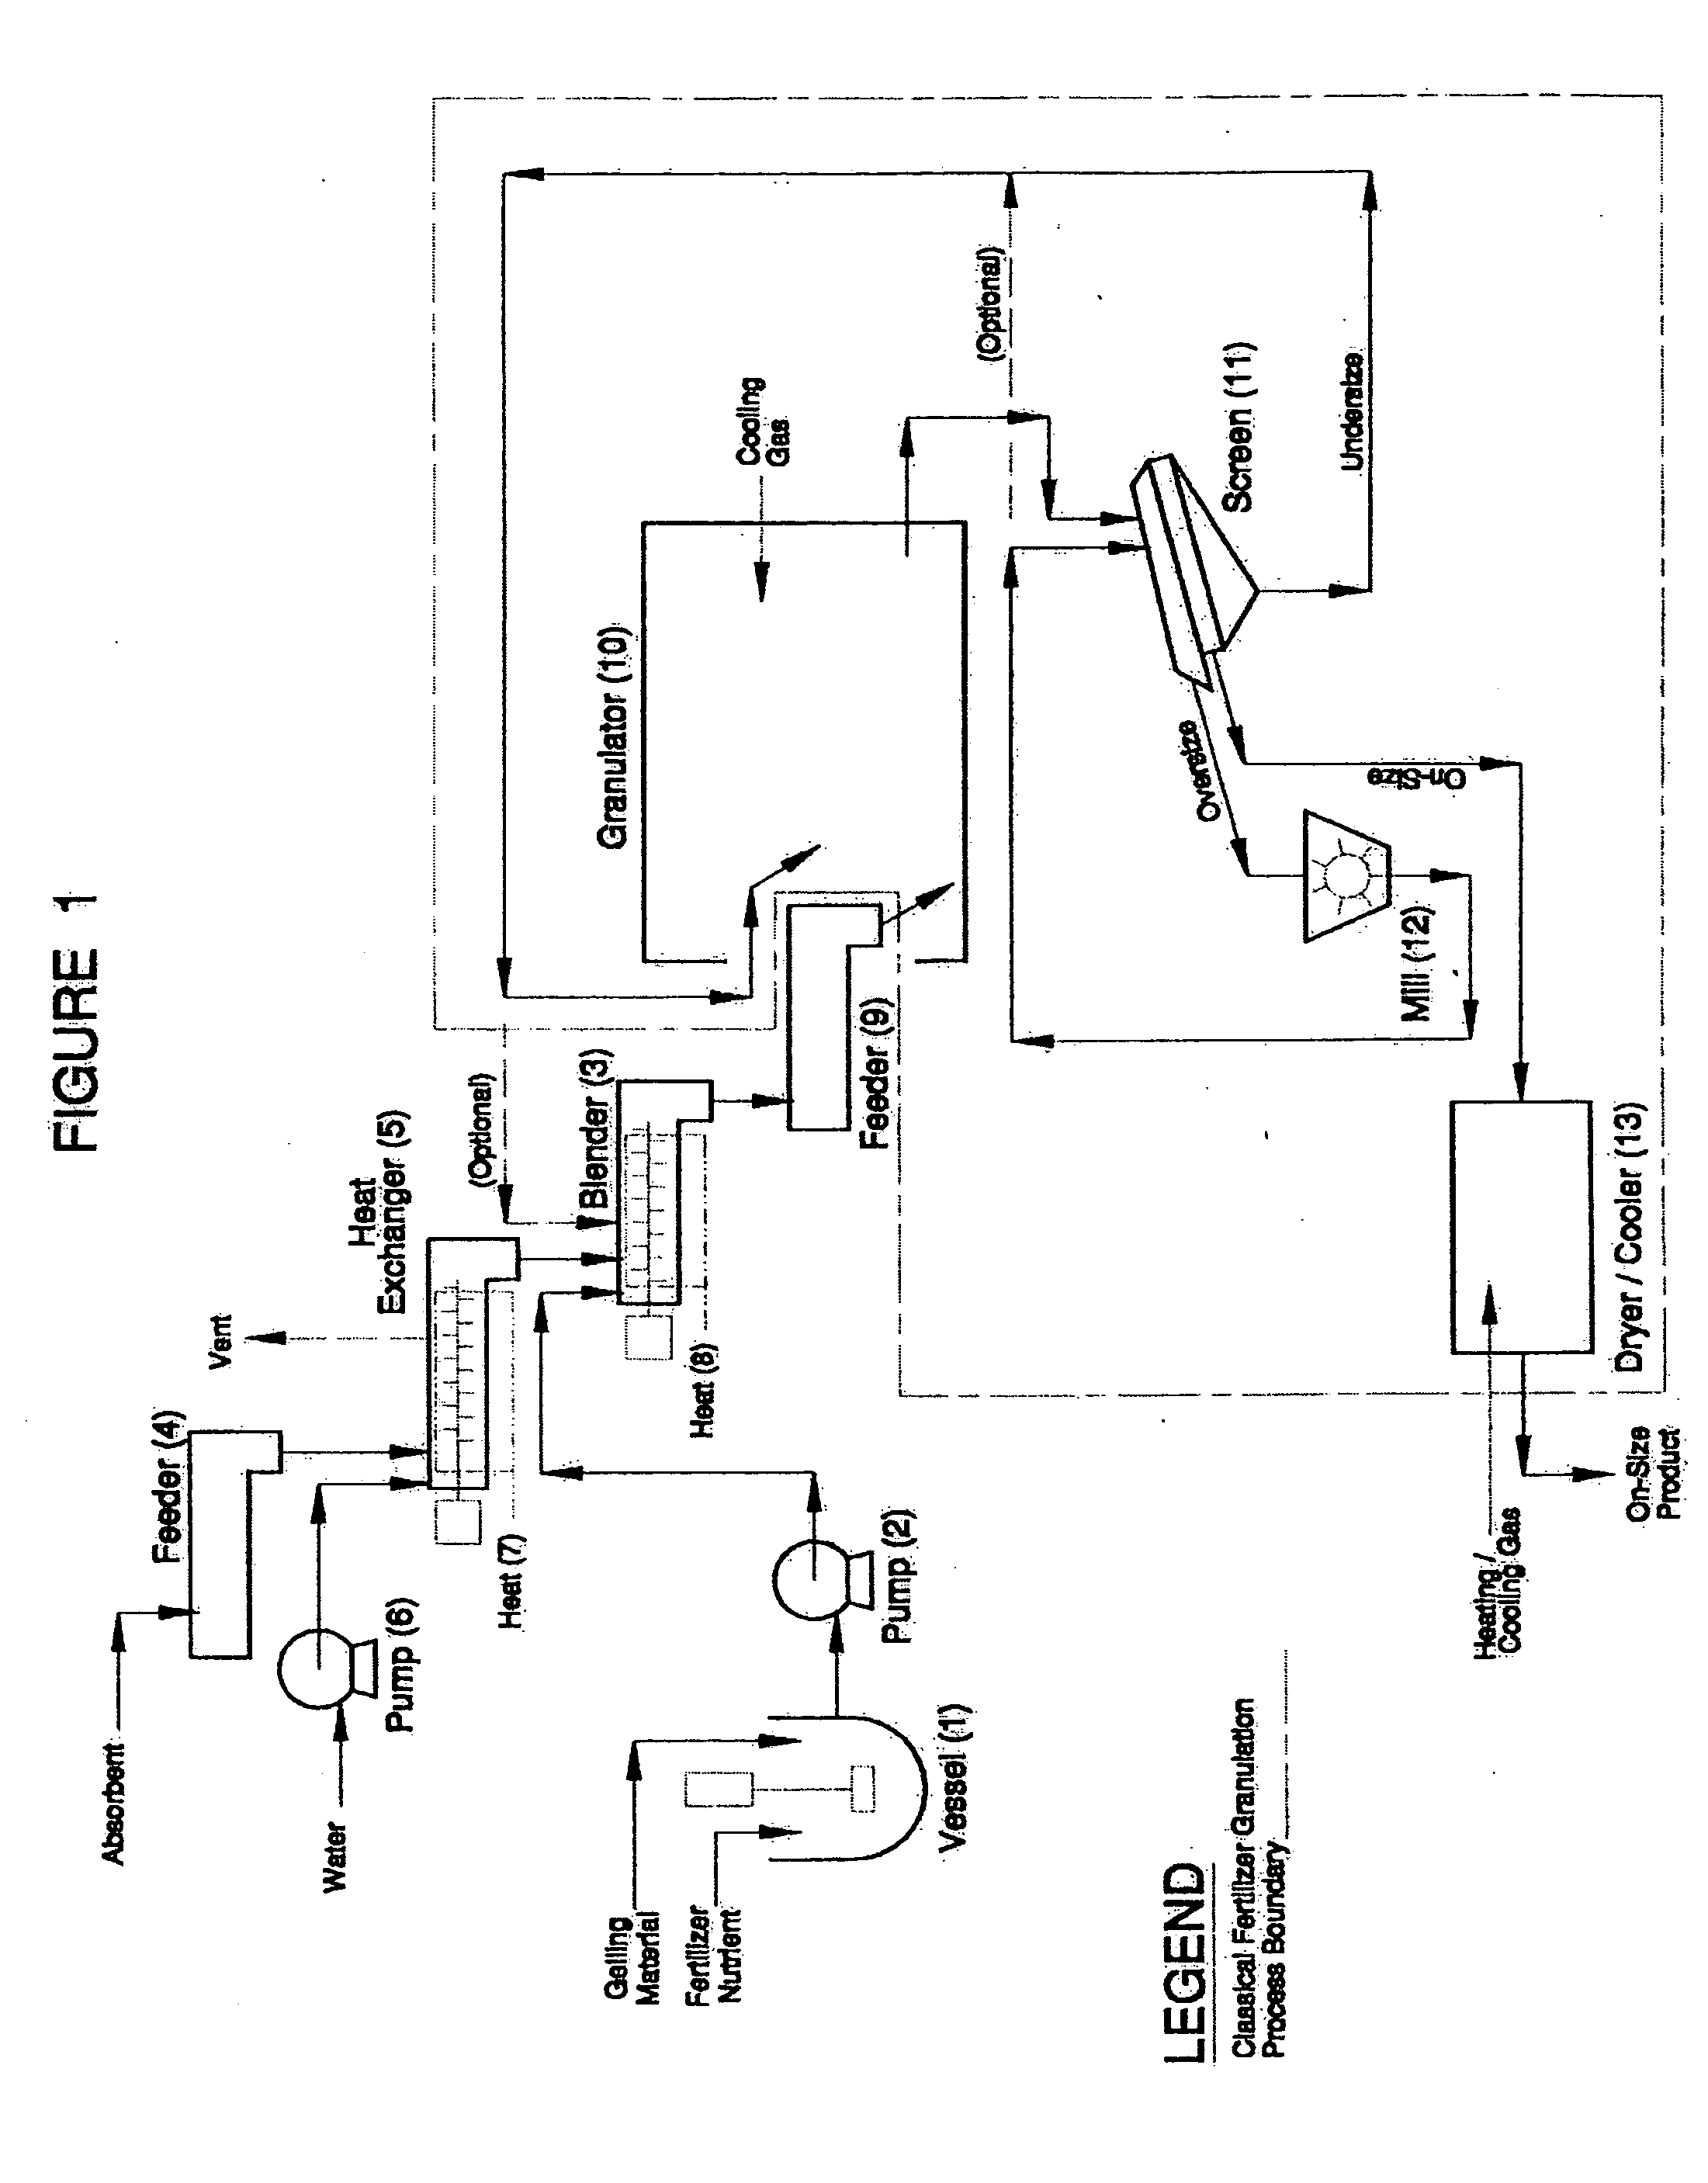 Controlled release fertilizers employing ureaform compounds and processes for making same